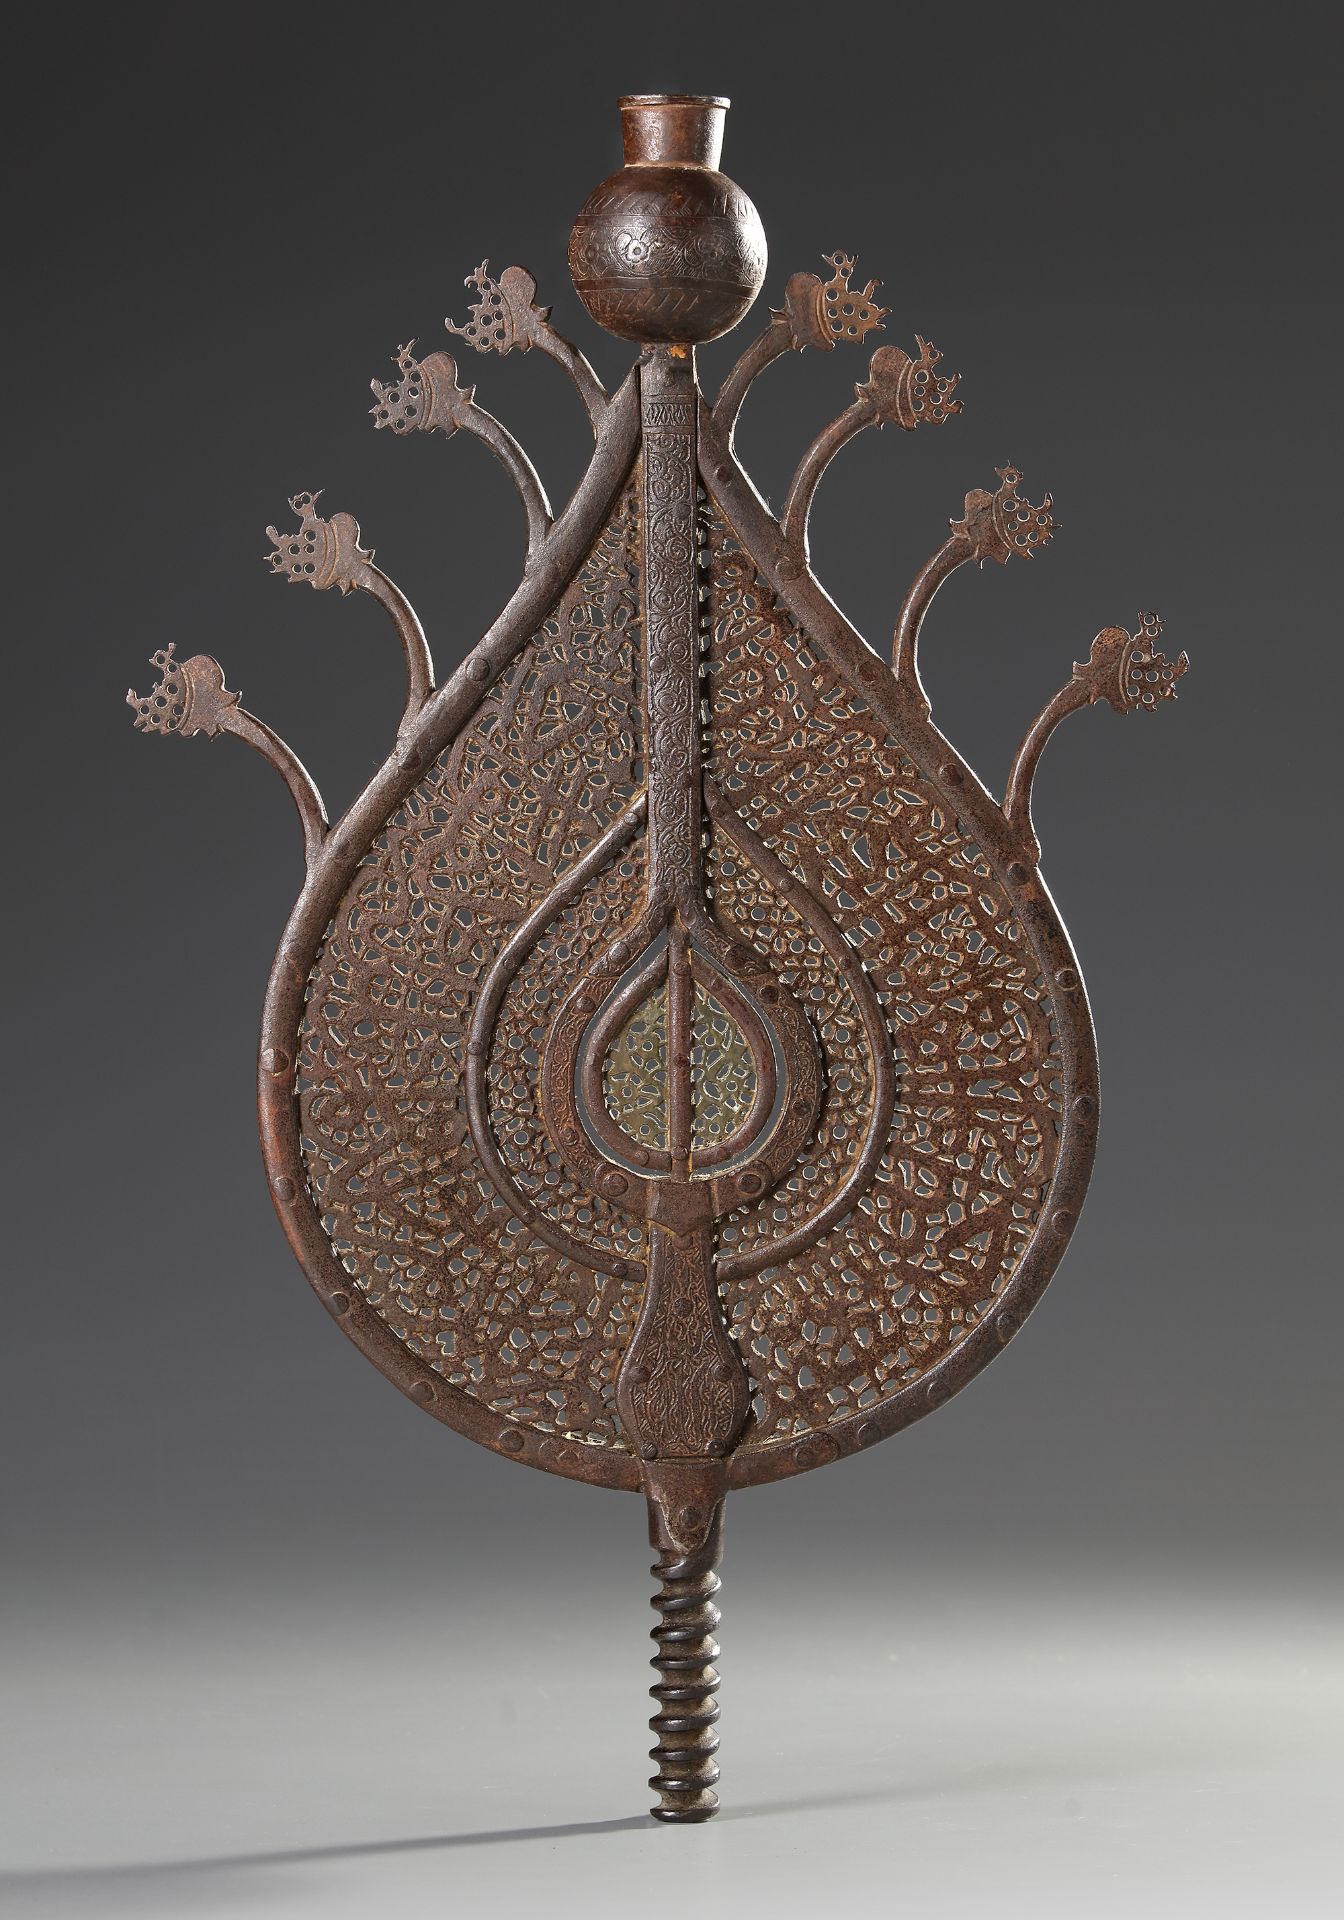 AN EARLY SAFAVID PIERCED BRONZE PROCESSIONAL STANDARD (ALAM), PERSIA, DATED 924 AH/1518 AD - Image 2 of 2